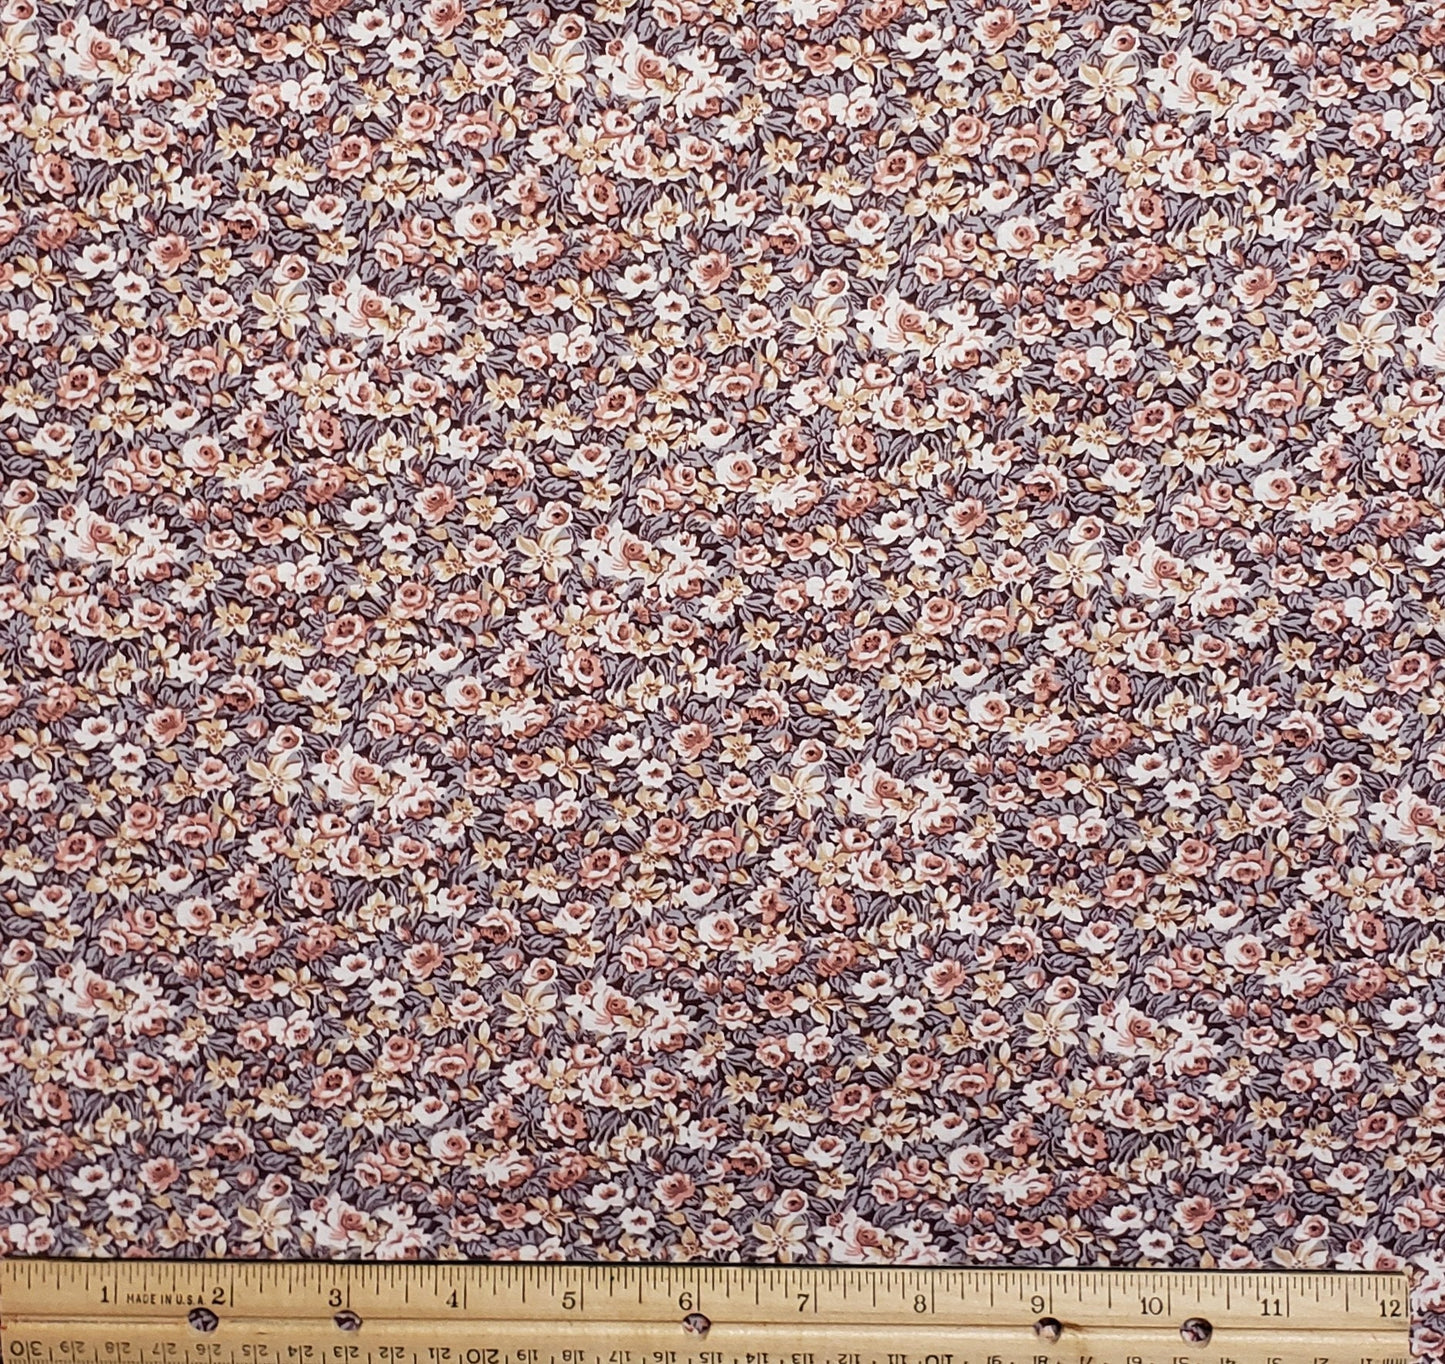 Dark Brown Fabric with Vintage Gray, Rose and Tan Floral Print